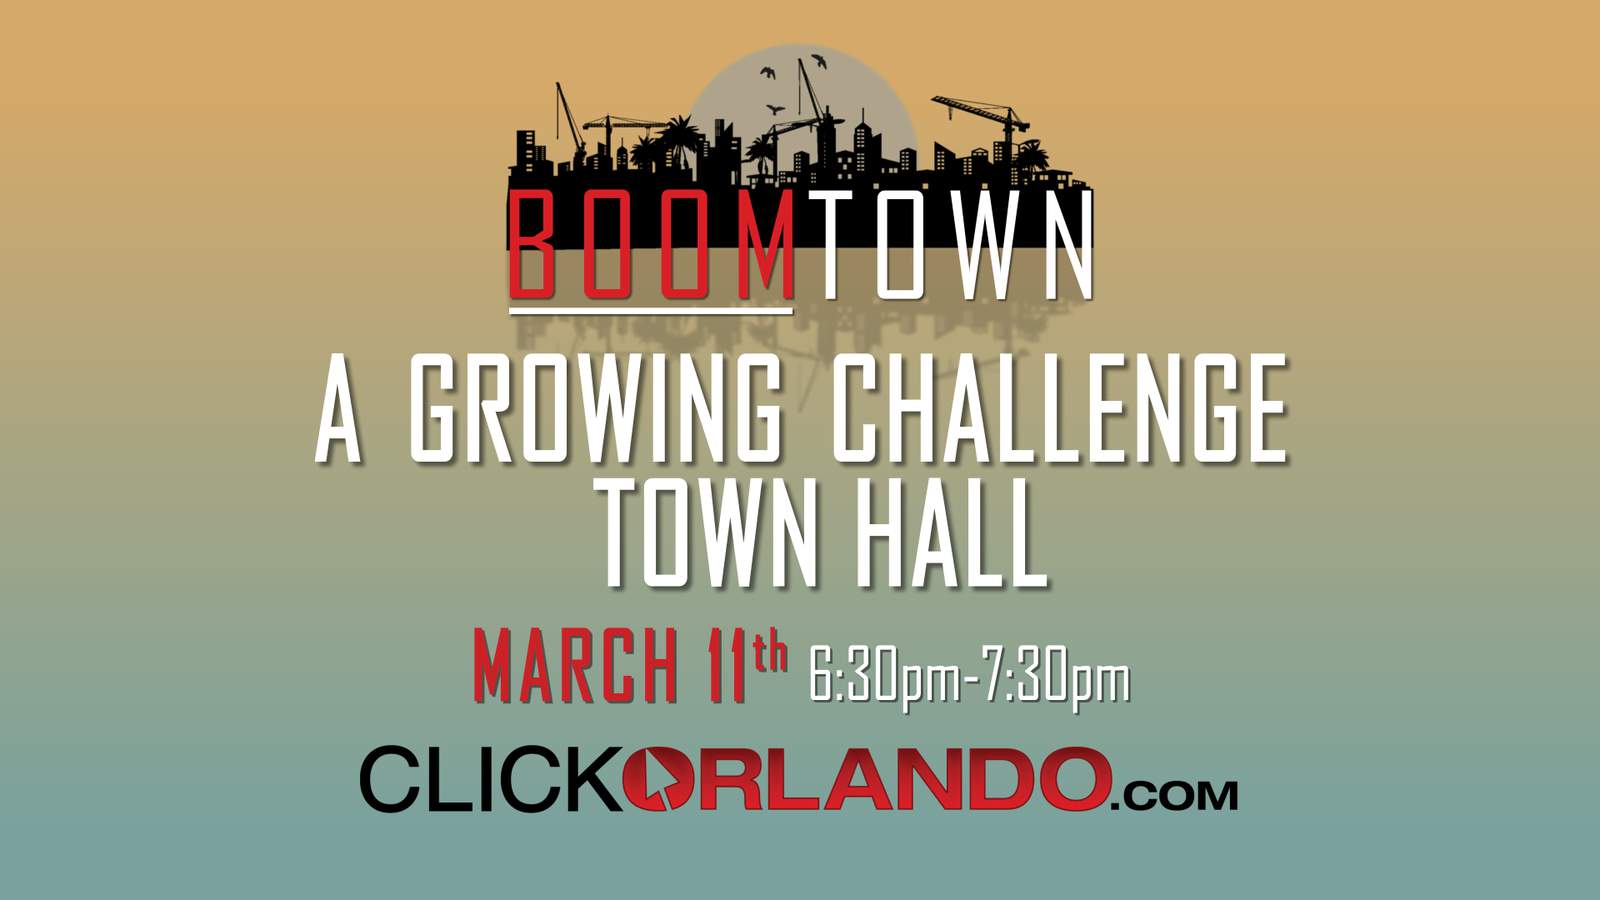 News 6 hosts Boomtown: A Growing Challenge town hall